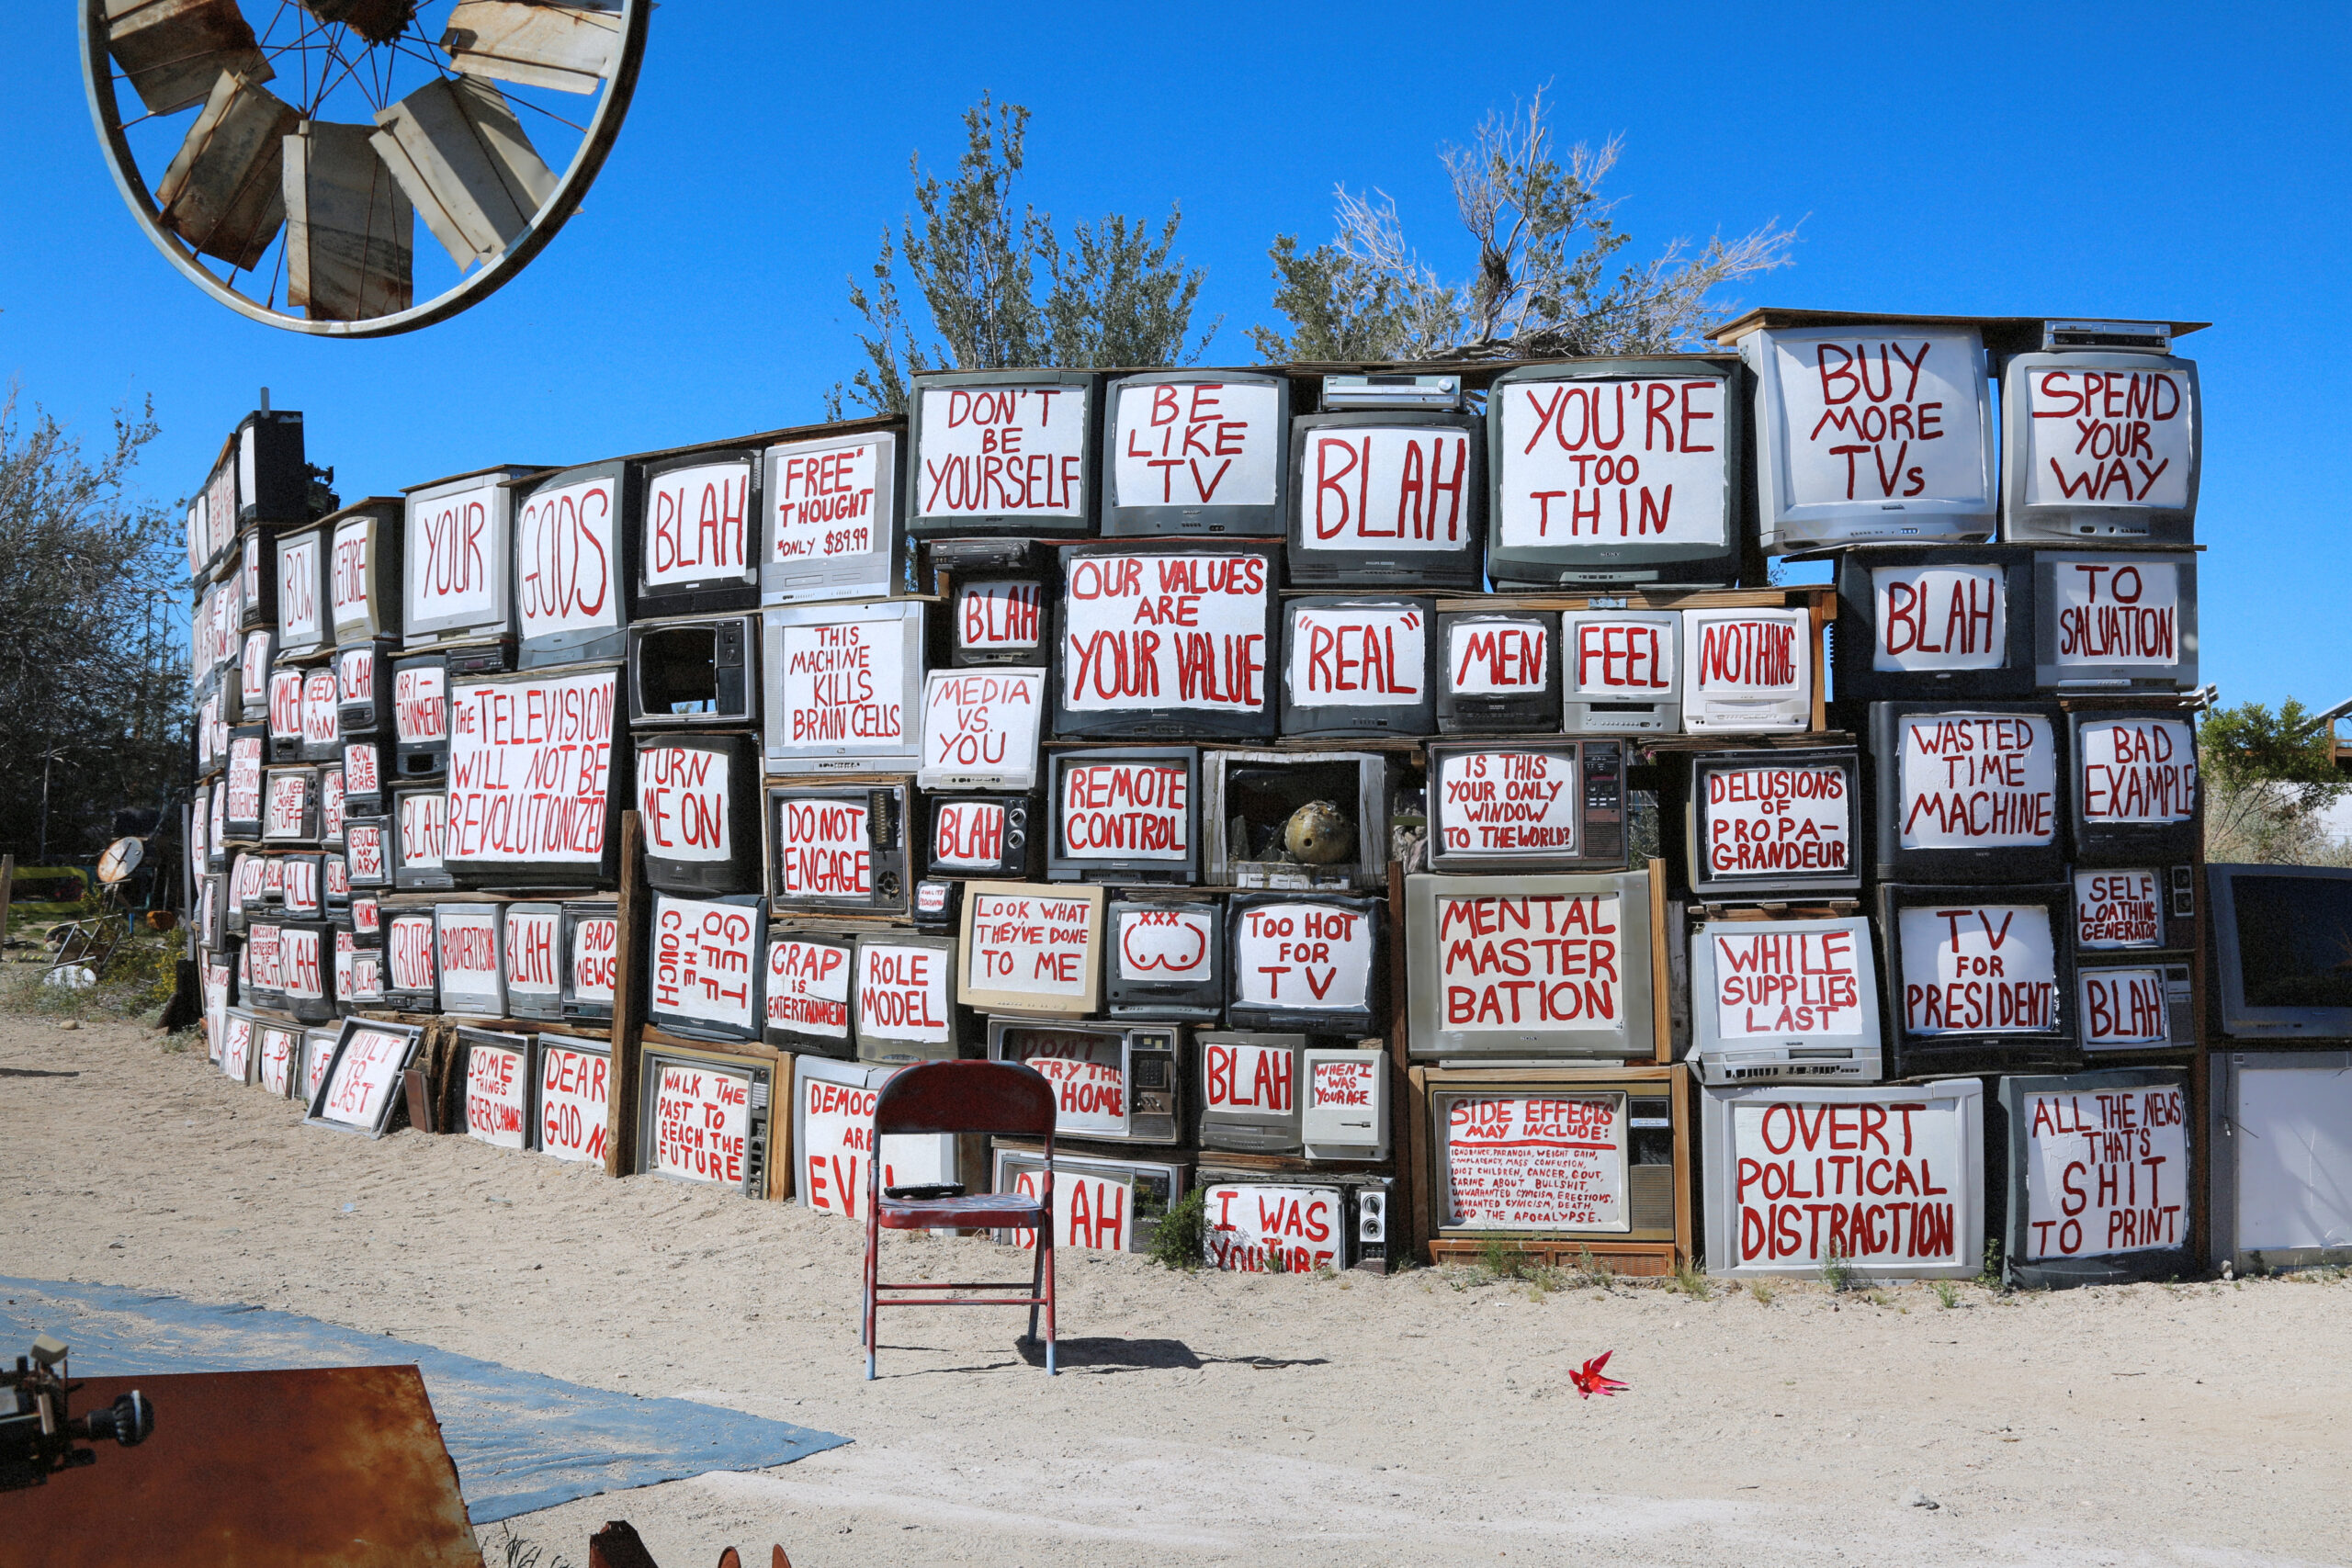 Outdoor art installation of messages painted on old television sets in East Jesus, California.